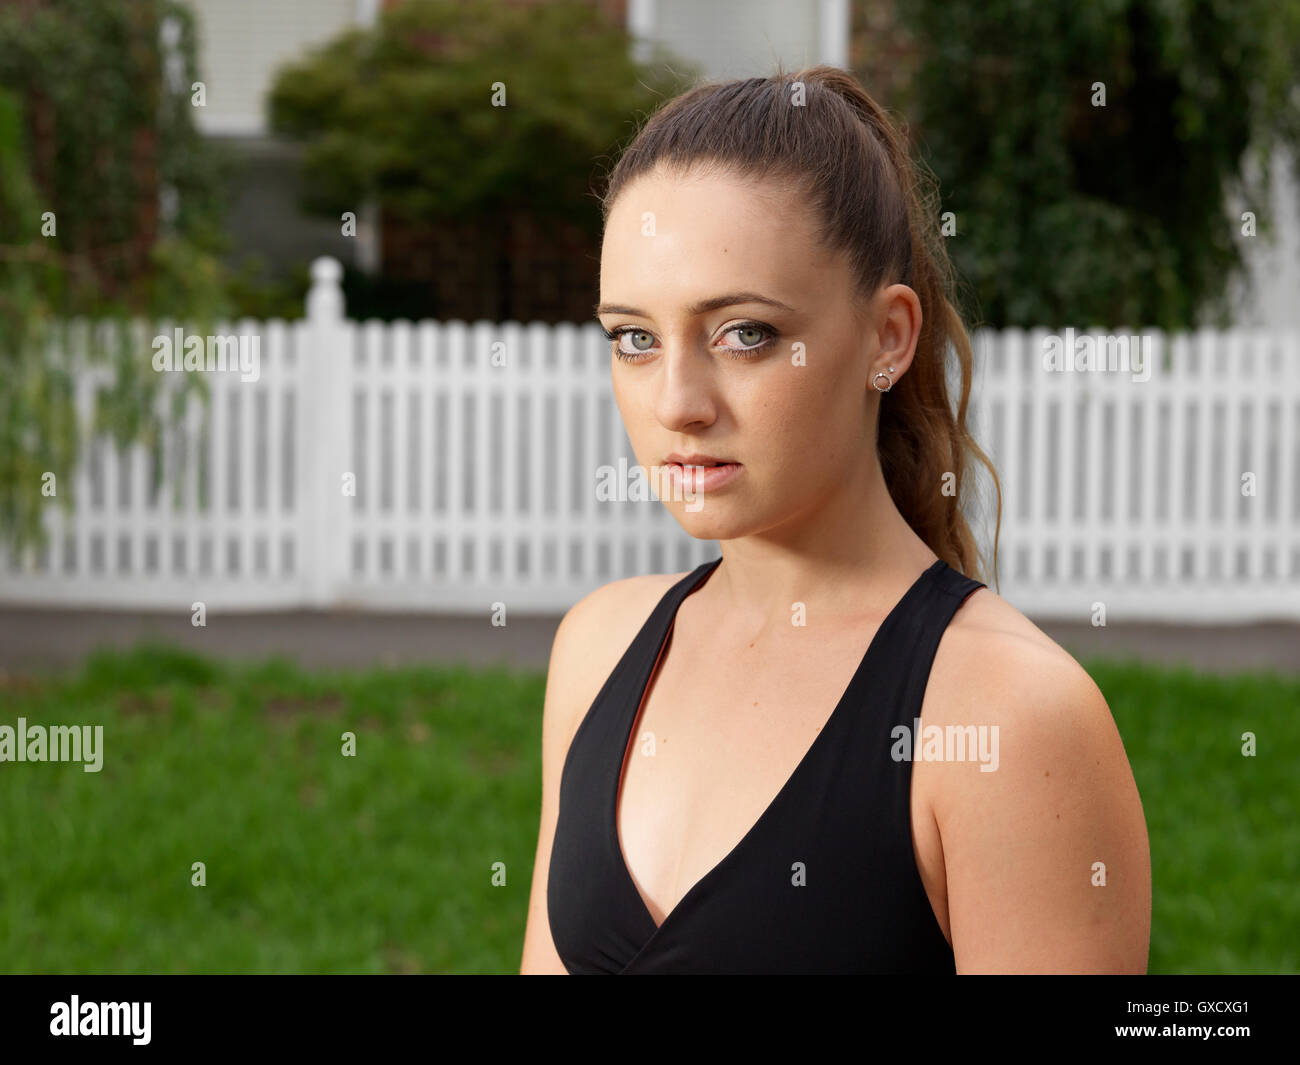 Head and shoulder portrait of young female athlete in park Stock Photo